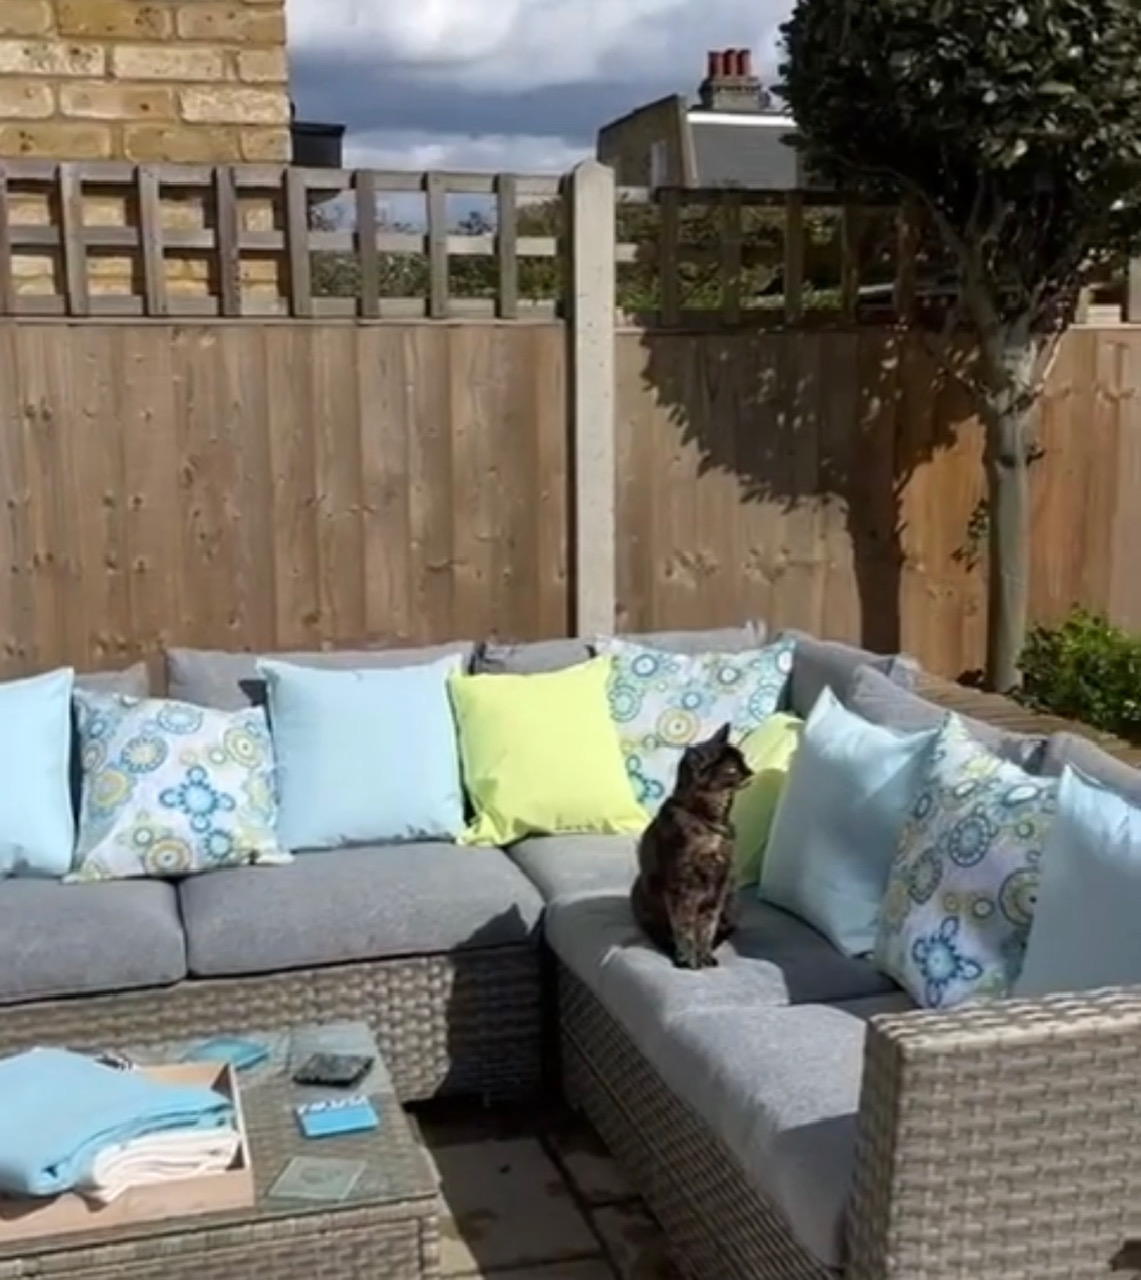 outdoor garden furniture with blue cushions and cat